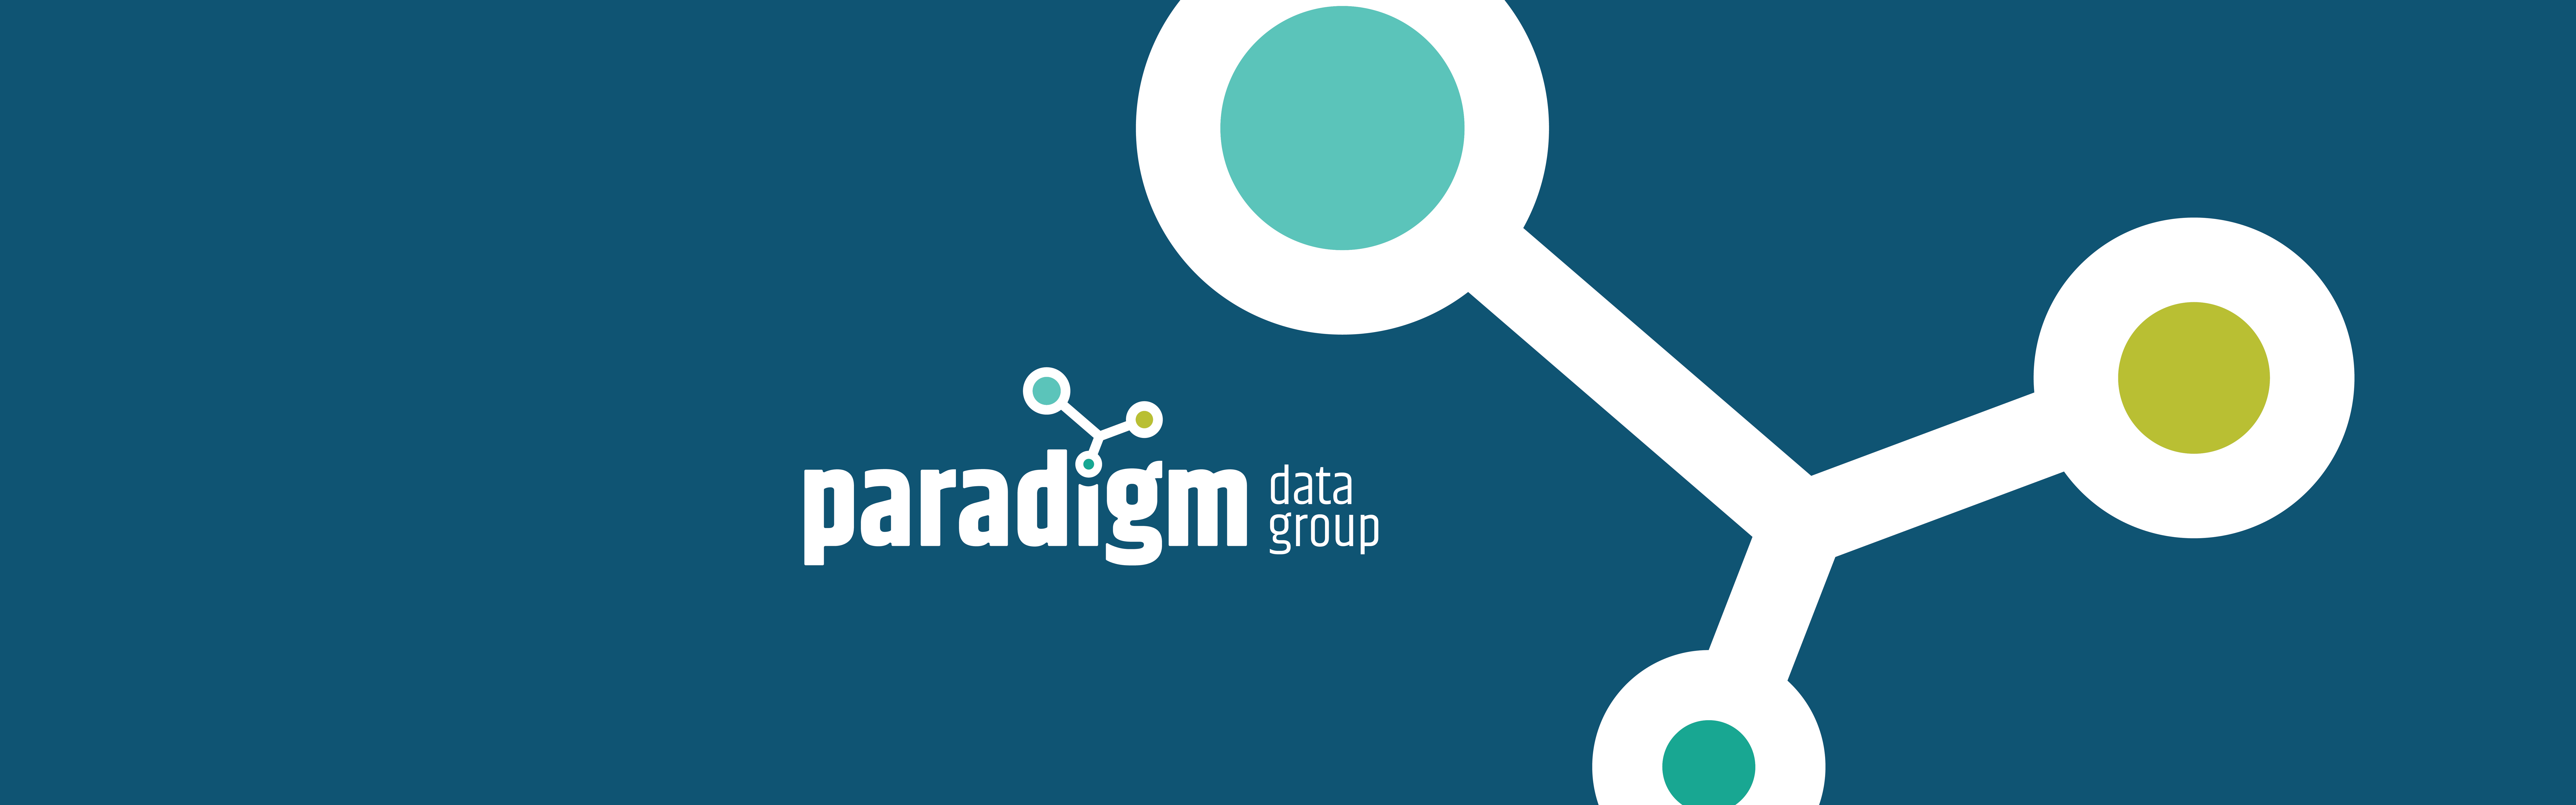 This image displays a graphic with light blue and white elements on a dark blue background, featuring a stylized depiction of molecular structures and the text "Paradigm Data Group.